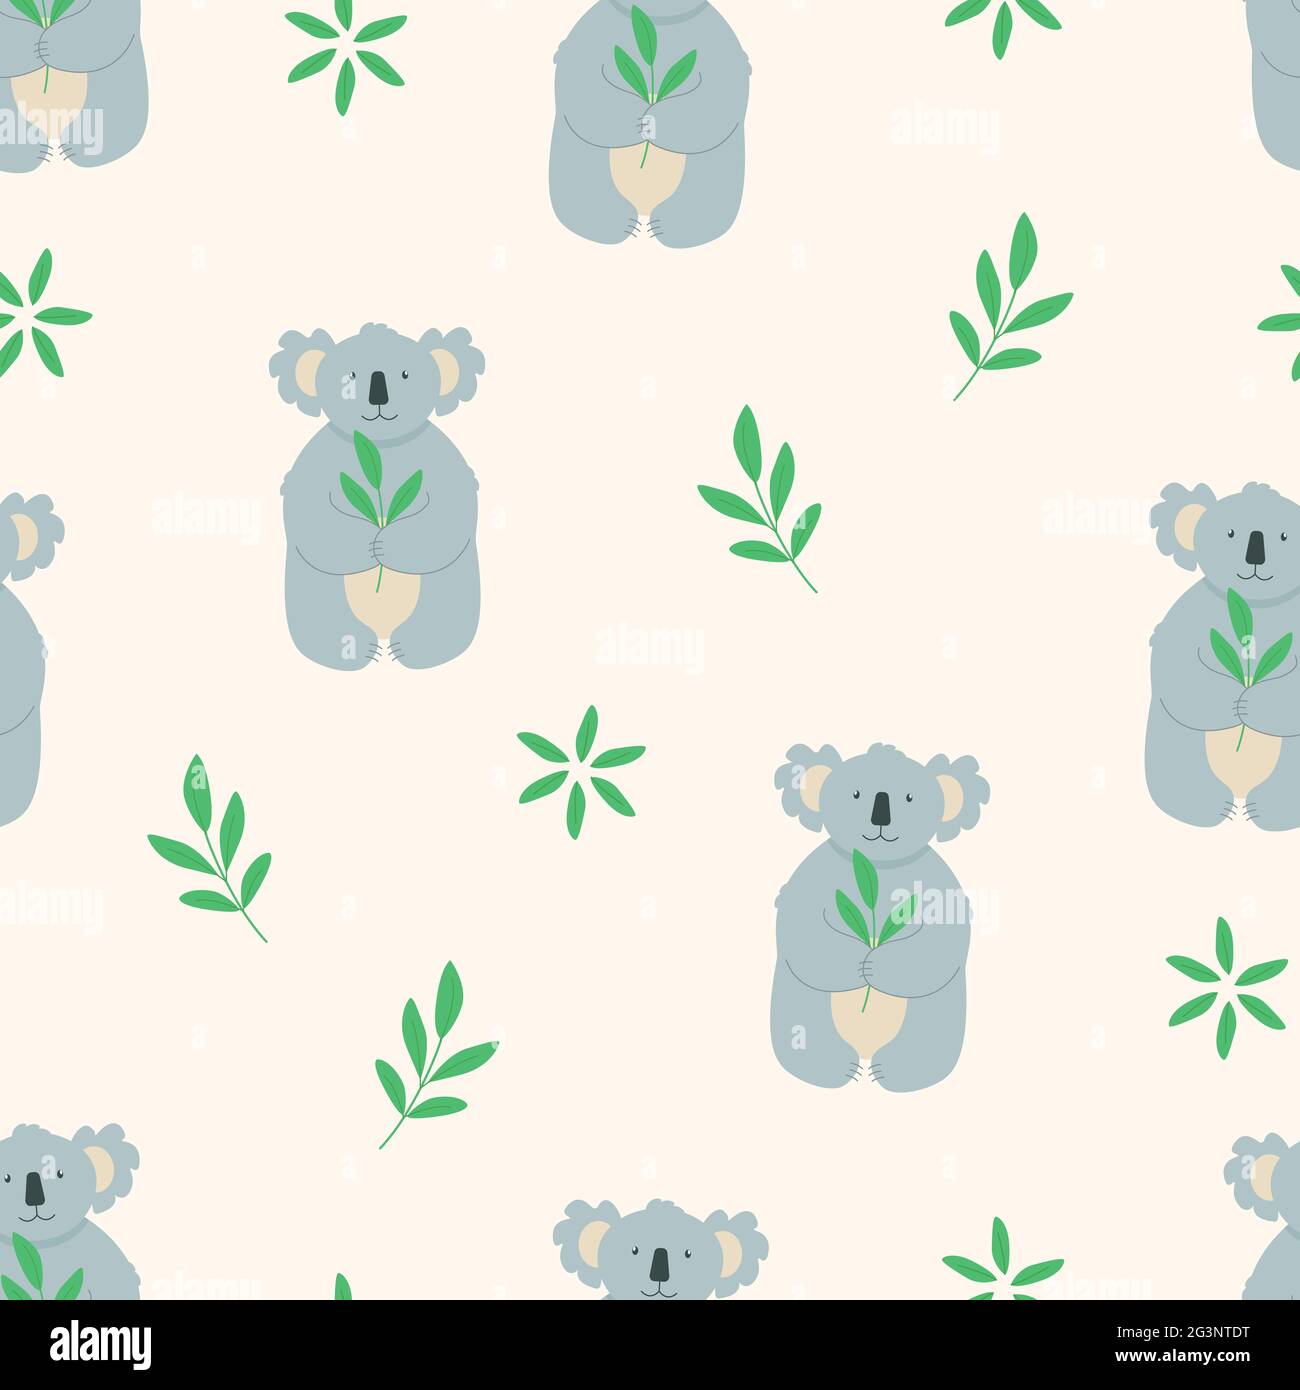 Seamless Pattern Cute cartoon character koala with a sprig of green eucalyptus leaves. Vector illustration Stock Photo